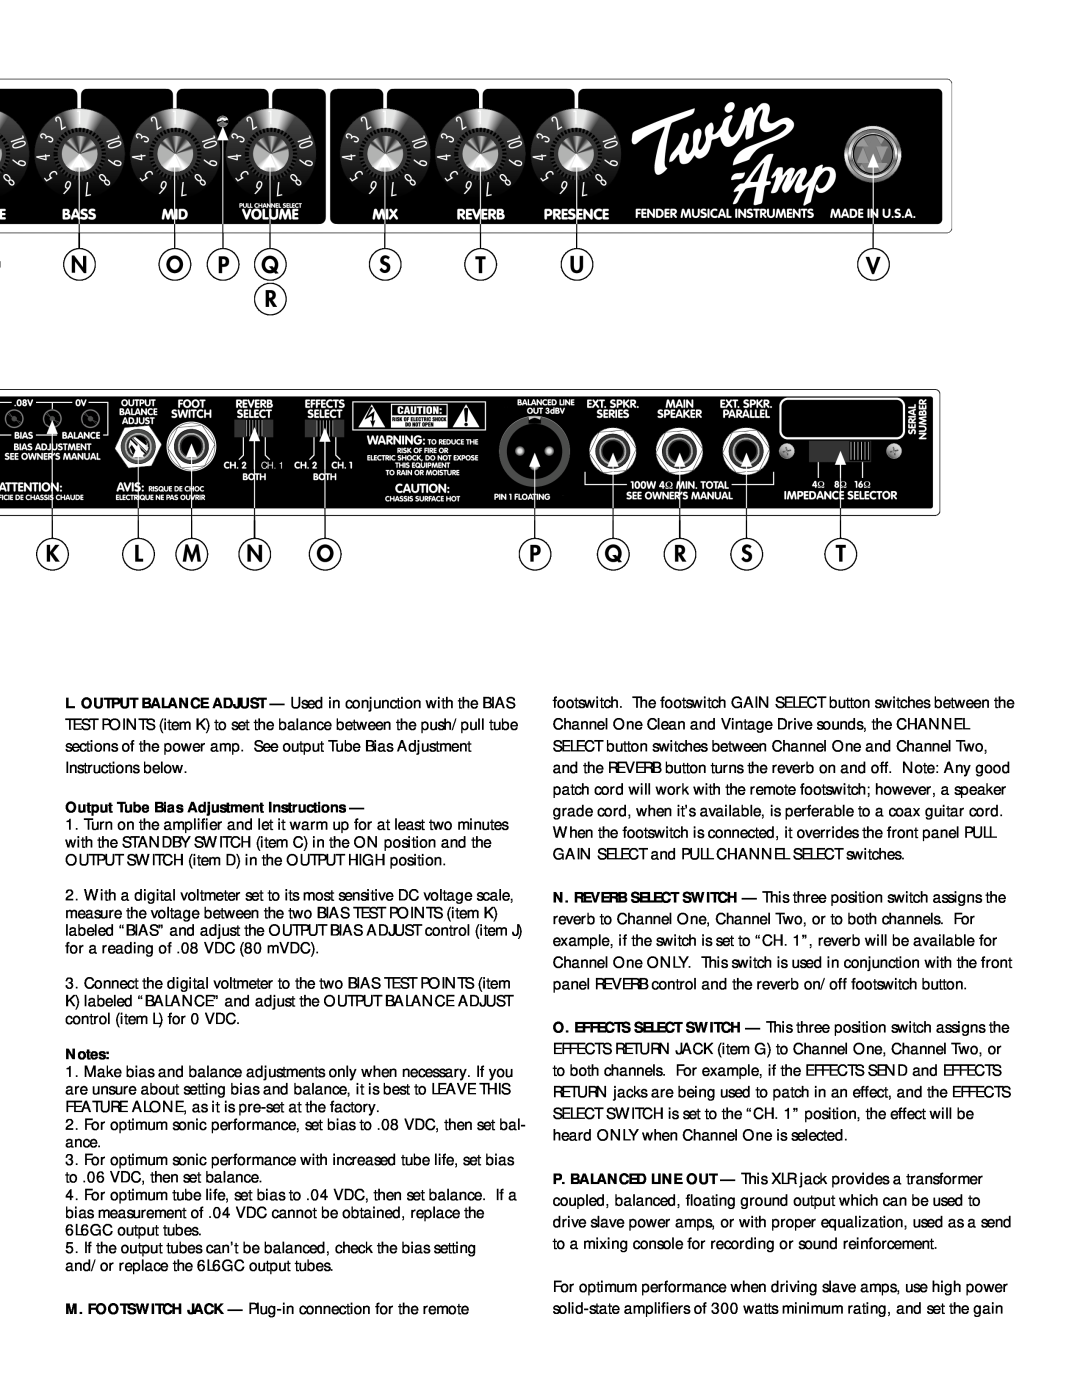 Fender Twin Amplifier owner manual Output Tube Bias Adjustment Instructions 